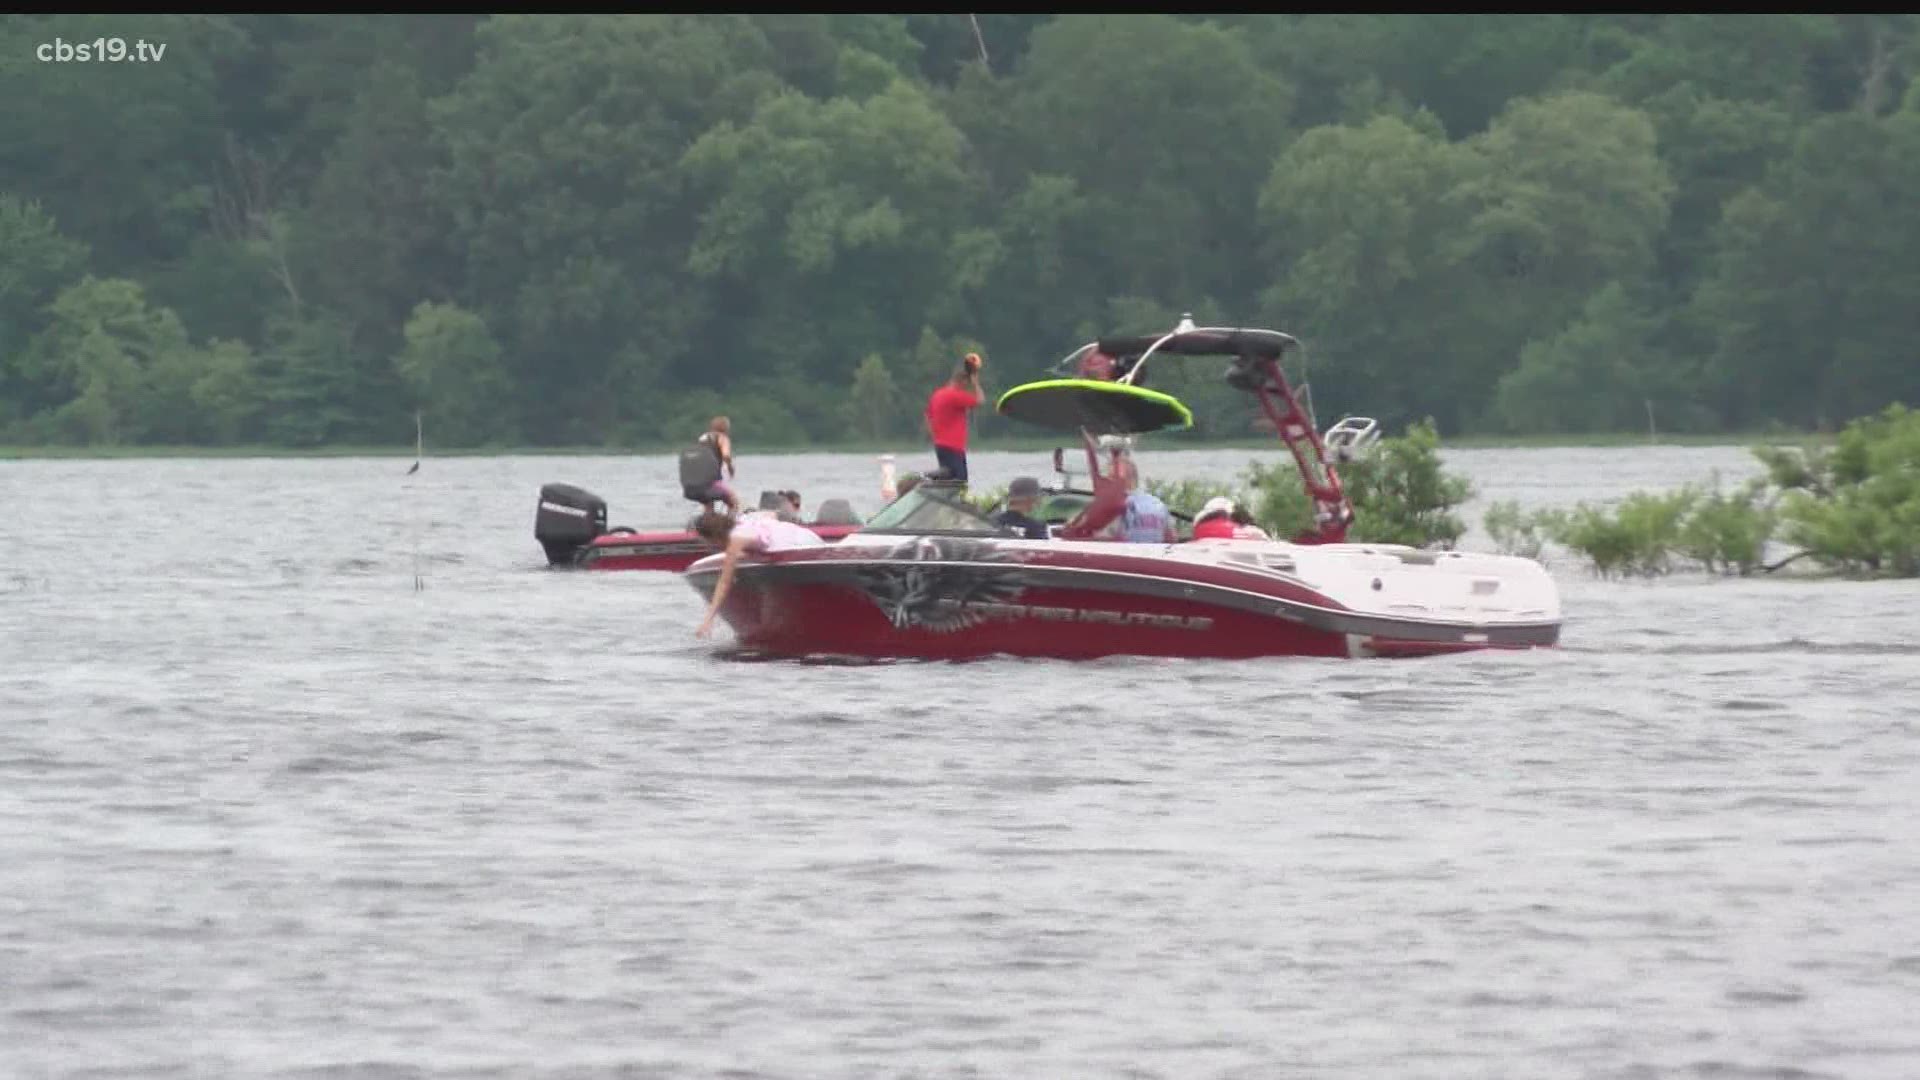 So far this year the number of boating accidents in the state of Texas are at an all-time high.